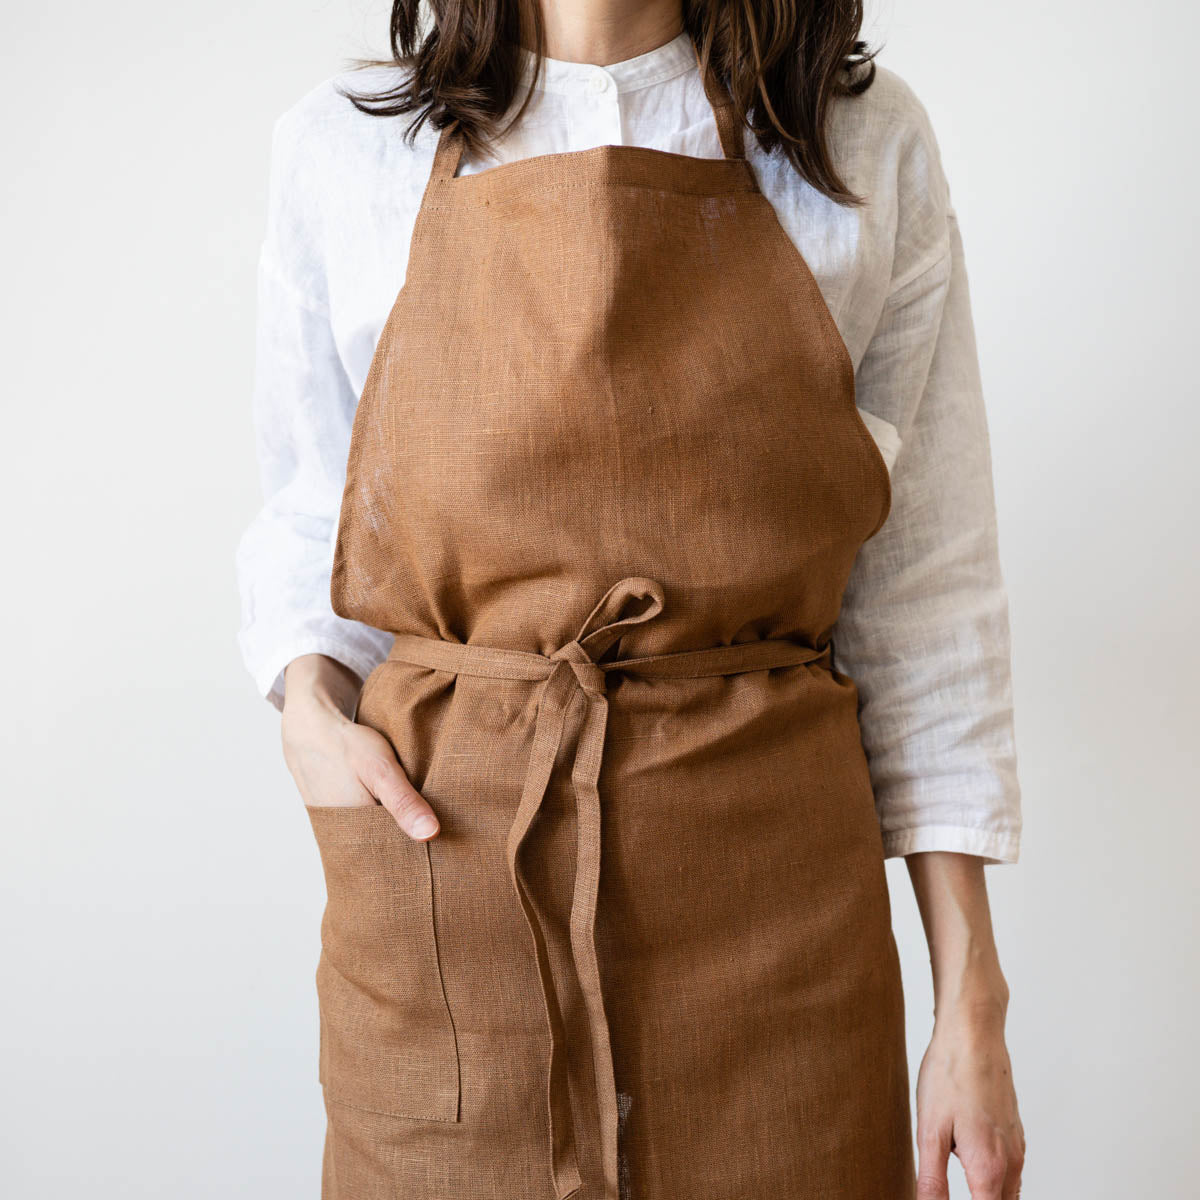 Sumptuously Soft Linen Dish Towels that Double as Aprons